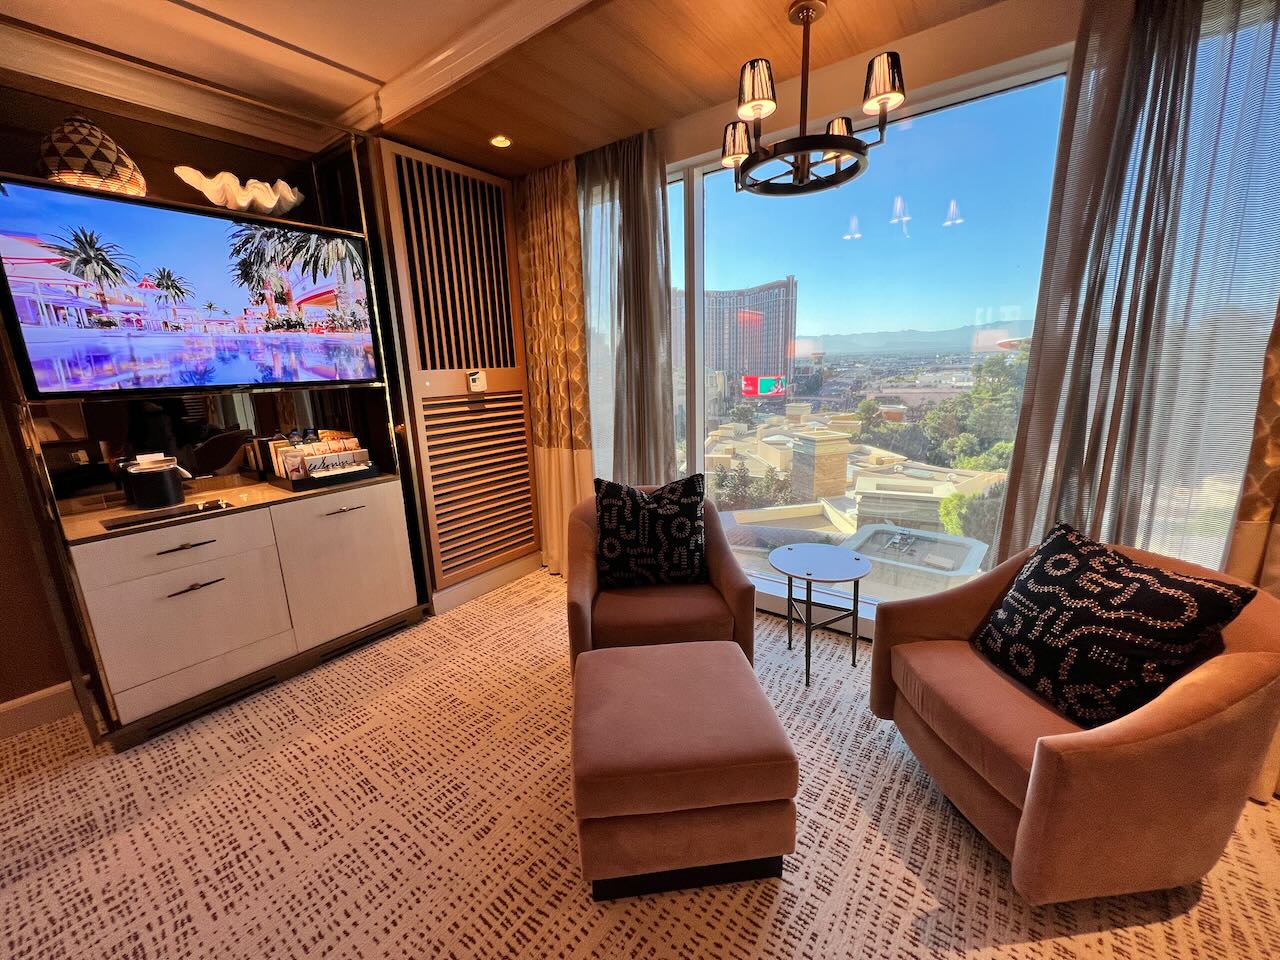 New Wynn Las Vegas Rooms - seating and TV